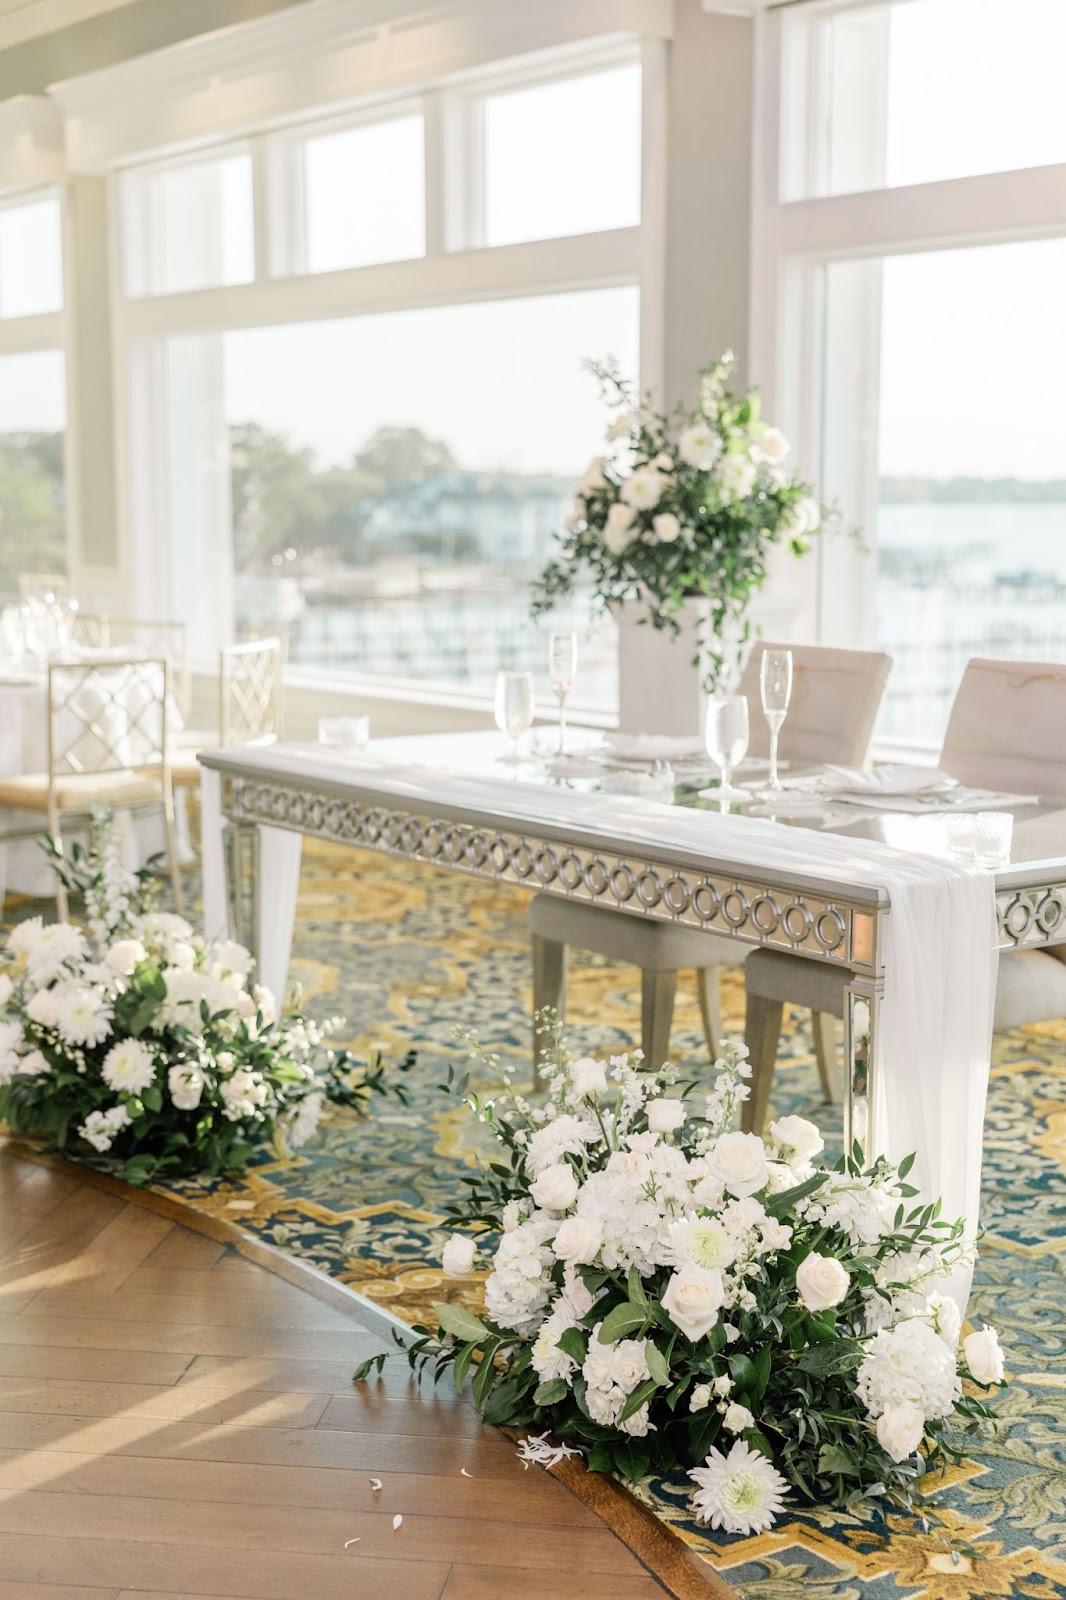 NJ Wedding Vendors: Making the Best Choices For Your Big Day